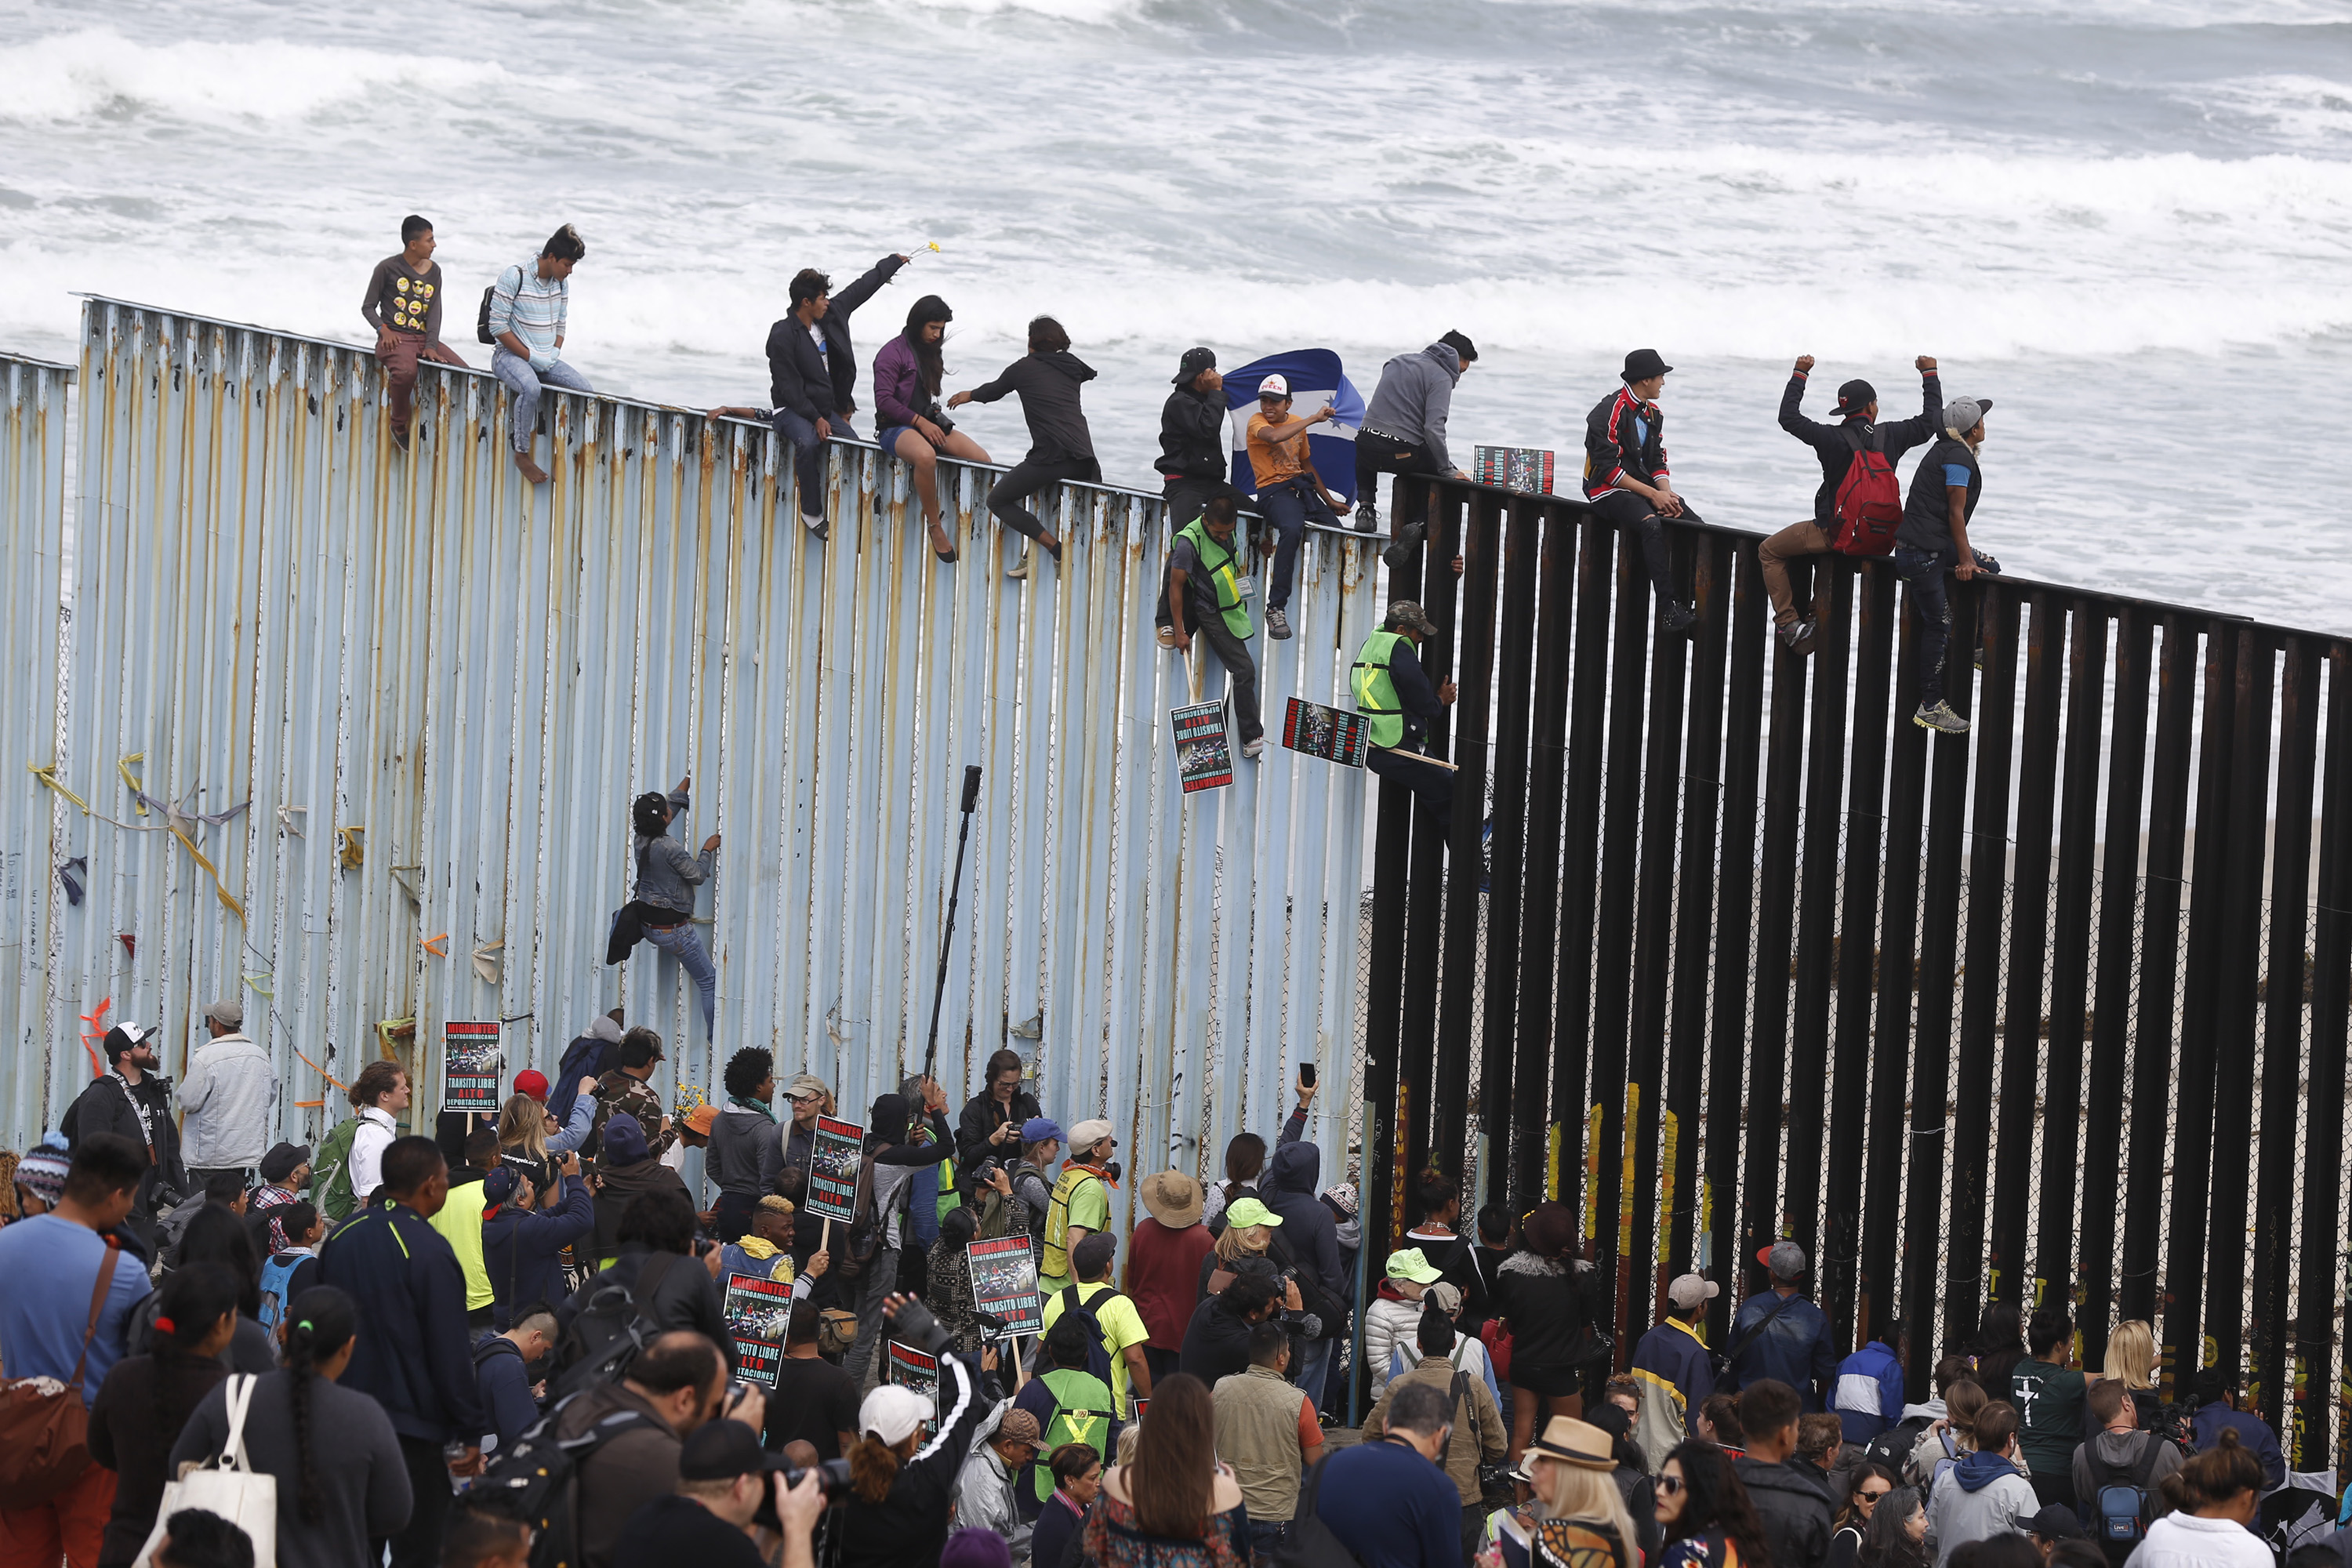 Migrants From Caravan Scale Border Wall In Protest After Denied Entry